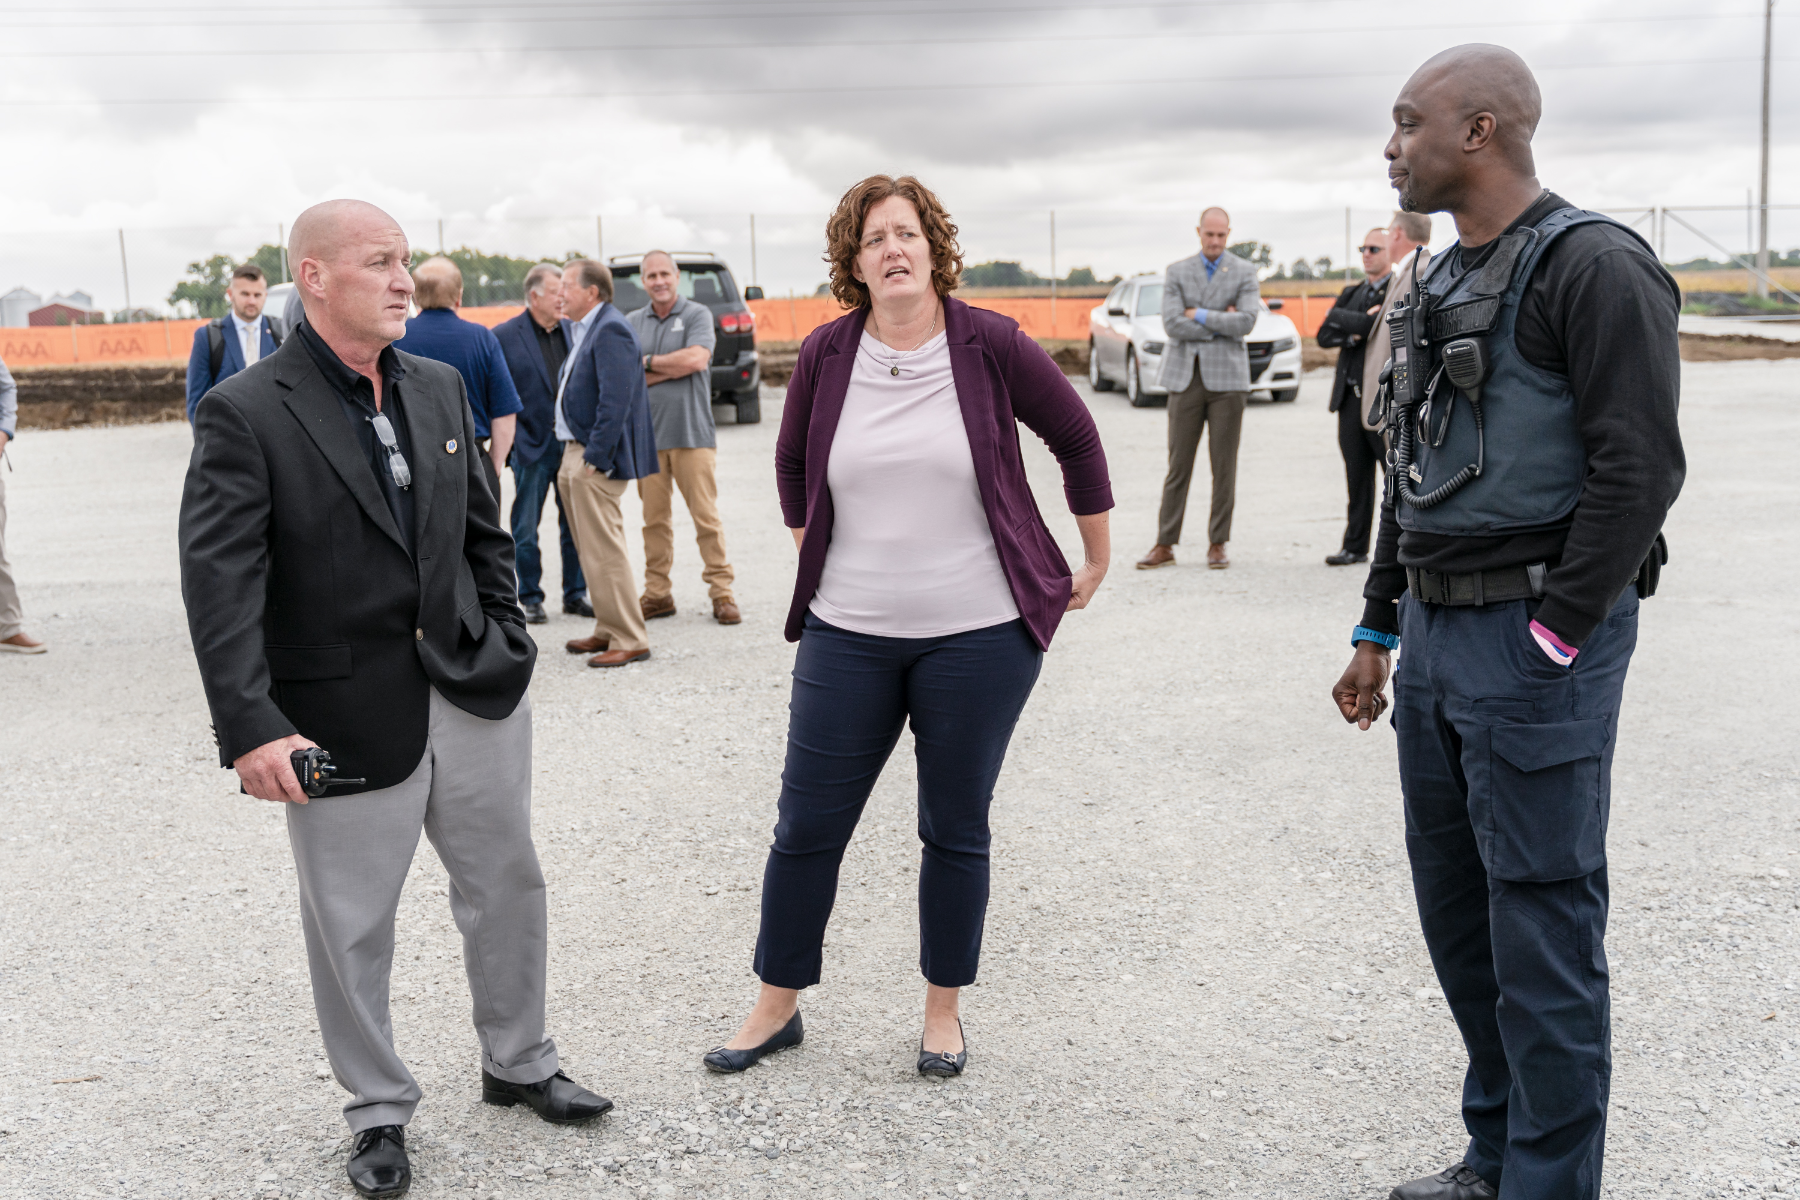 Westville Correctional Facility Warden John Galipeau speaks with IDOC Commissioner Christina Reagle on Thursday, Sep. 28, 2023 before the groundbreaking for the new $1.2 Billion correctional facility under construction in Westville, Indiana. SCOTT ROBERSON | Indiana Department of Correction